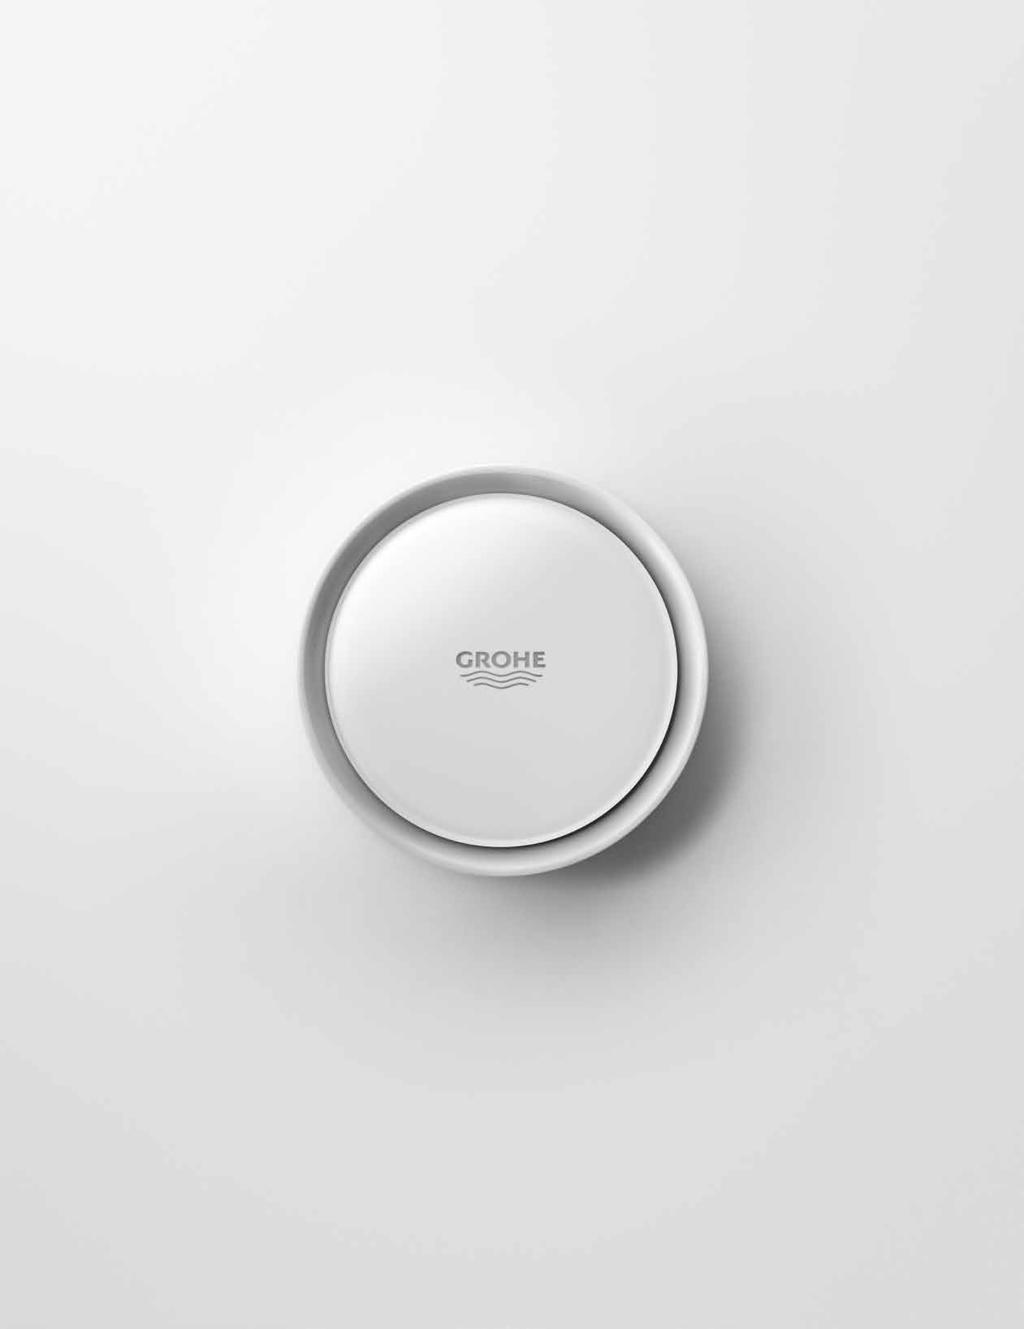 GROHE SENSE AND GROHE SENSE GUARD : YOUR SECURITY TEAM FOR WATER SAFETY IN THE HOME GROHE Sense and GROHE Sense Guard offer a comprehensive water